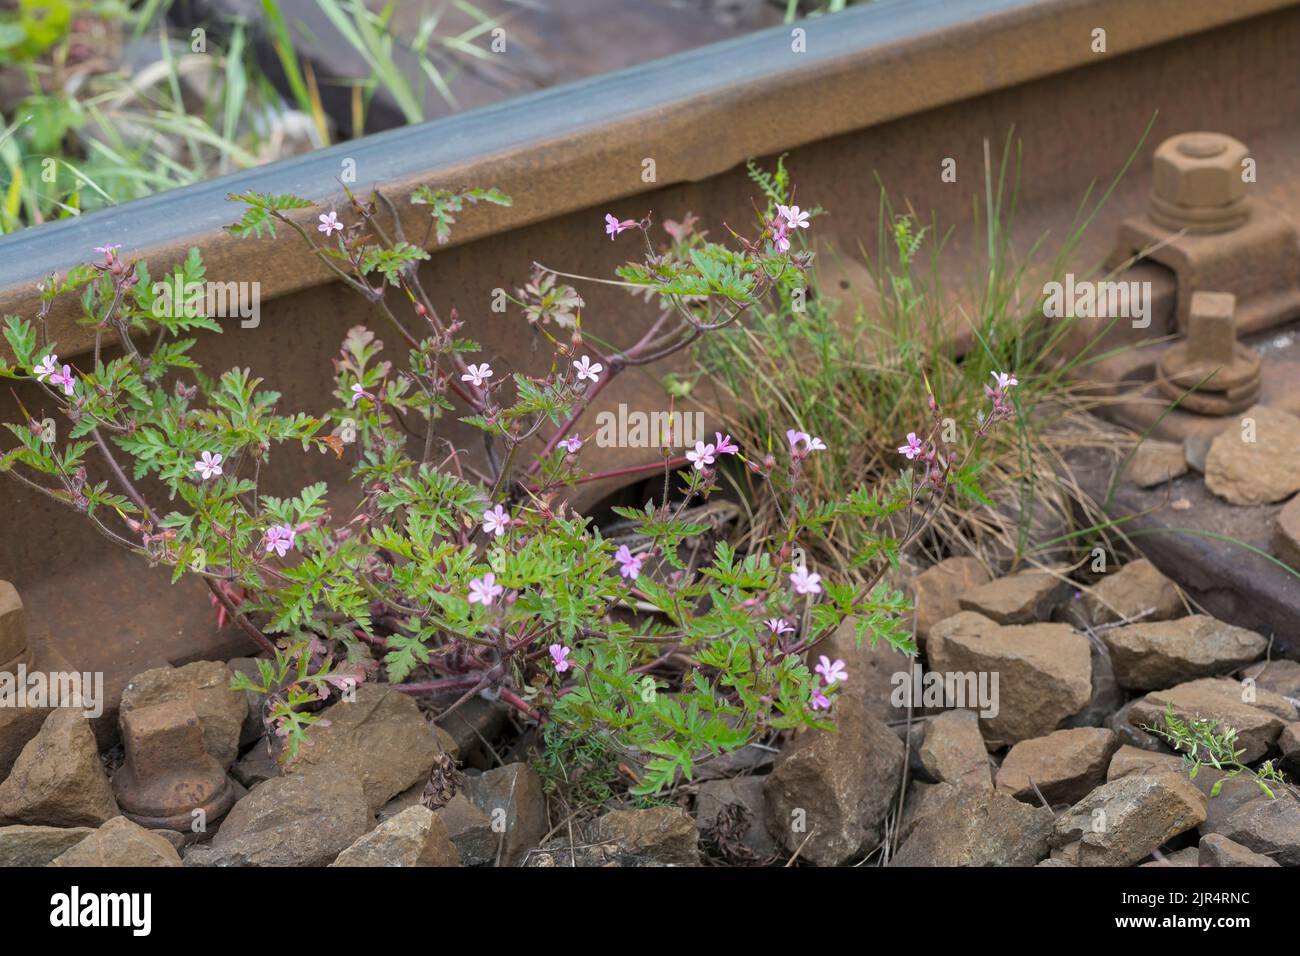 Herb Robert, Red Robin, Death come quickly, Robert Geranium (Geranium robertianum, Robertiella robertiana), grows next to rail tracks, Germany Stock Photo